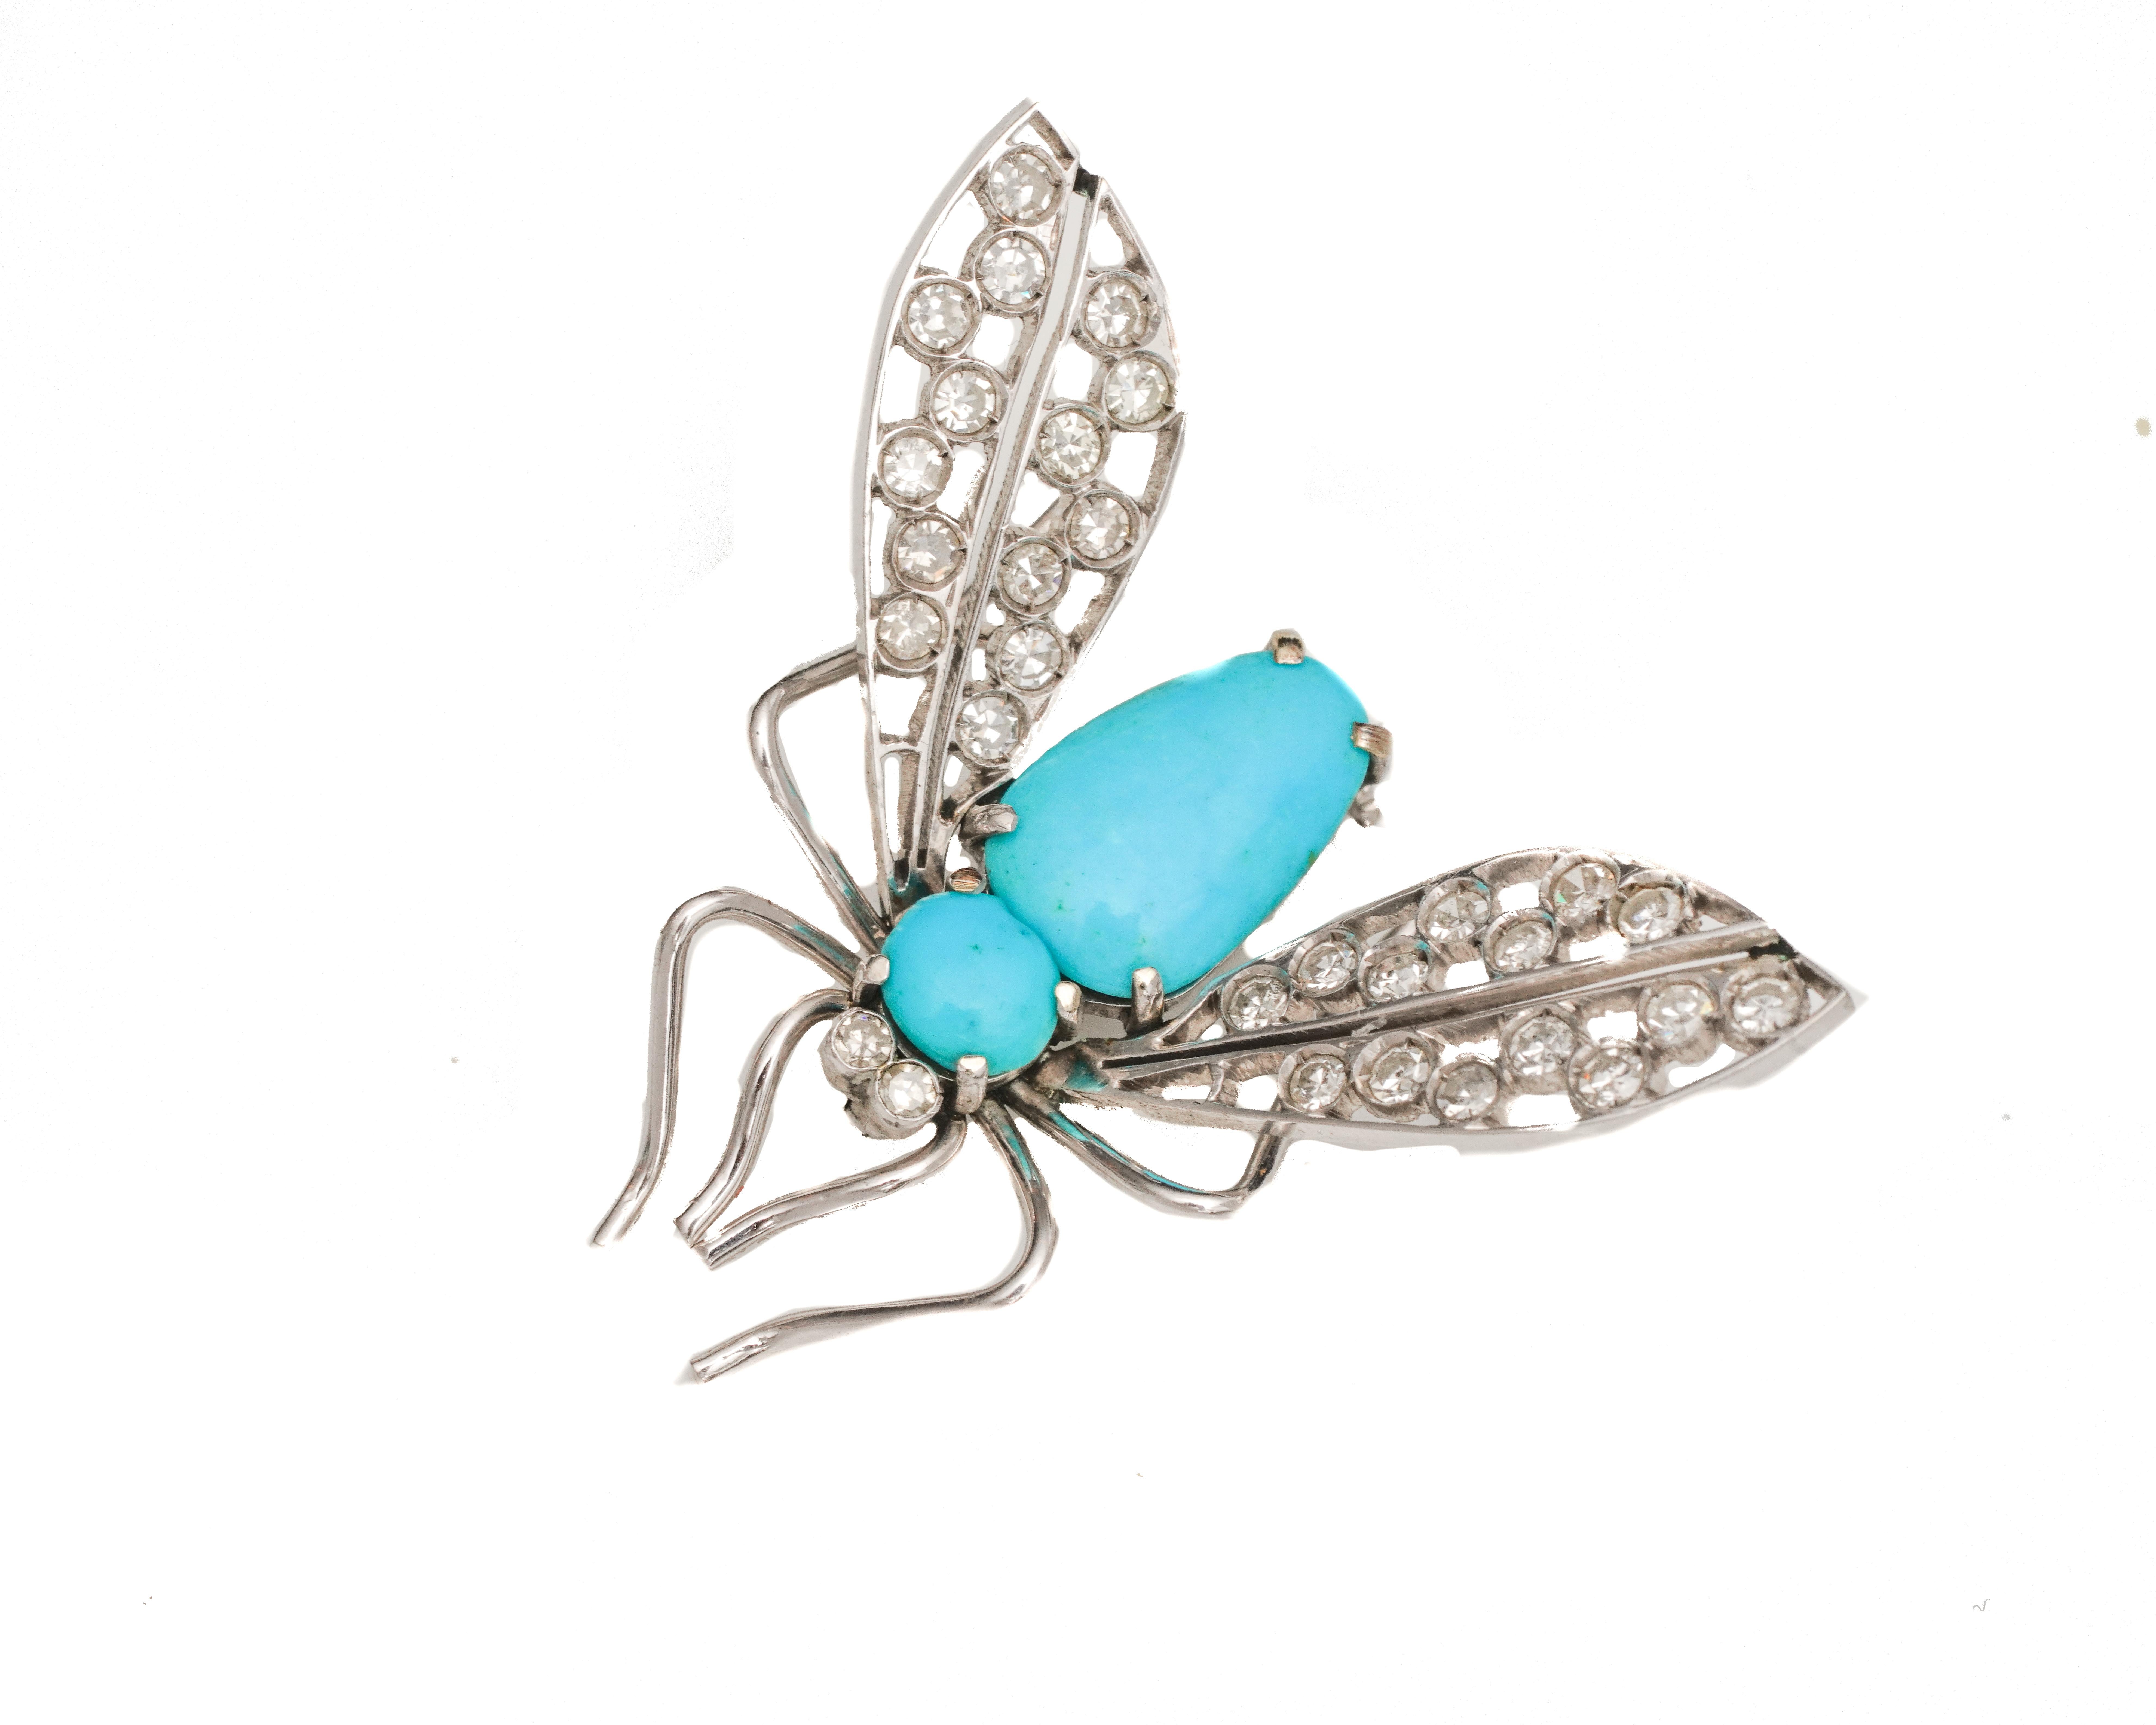 Item Details:
Metal type: 14 Karat White Gold & Platinum 
Weight: 5.7 grams
Measures 2 inch width x 2 inch length 

Features:
Body of insect made of Turquoise gemstone 
Wings of insect made of Single Cut Diamonds

Diamond Details:
Cut: Single